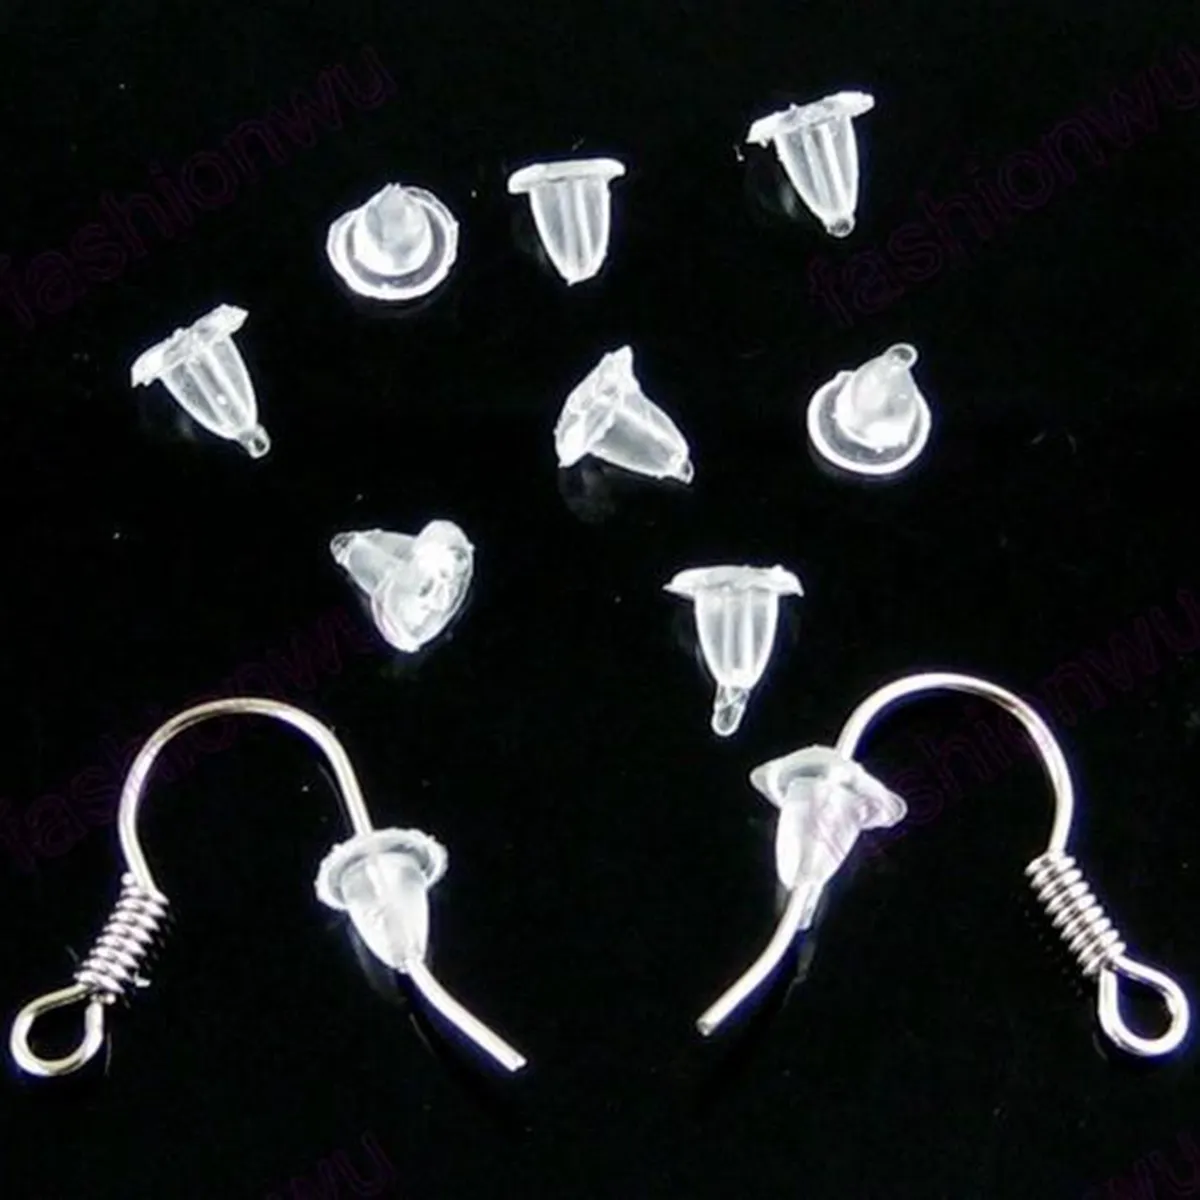 Hot Sell ! 2000Pcs / lots Useful white Transparent Plastic Earrings Back Stopper 4mm DIY Earrings Accessories